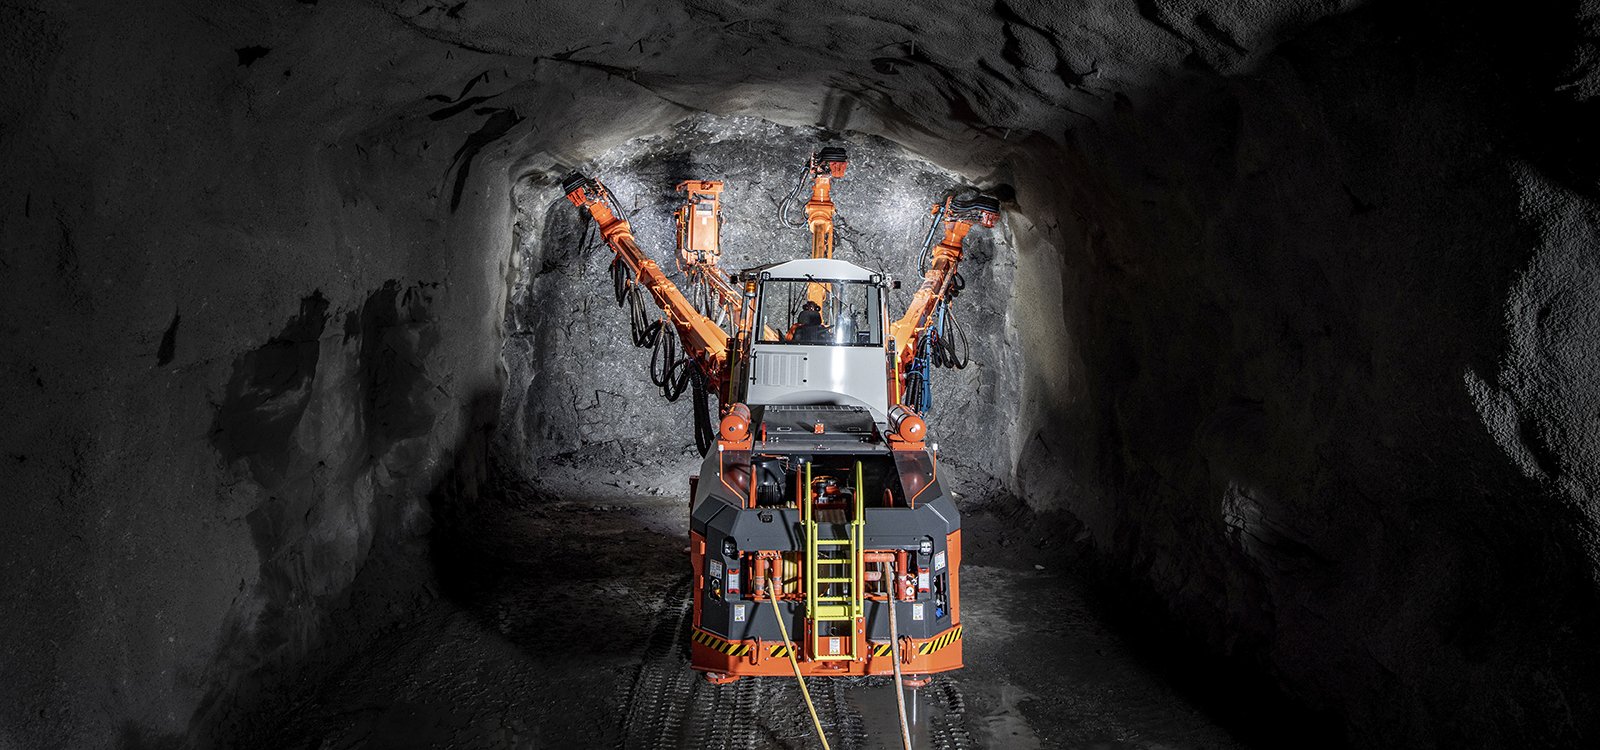 The new RD535 rock drill cuts energy consumption by up to 20 percent.